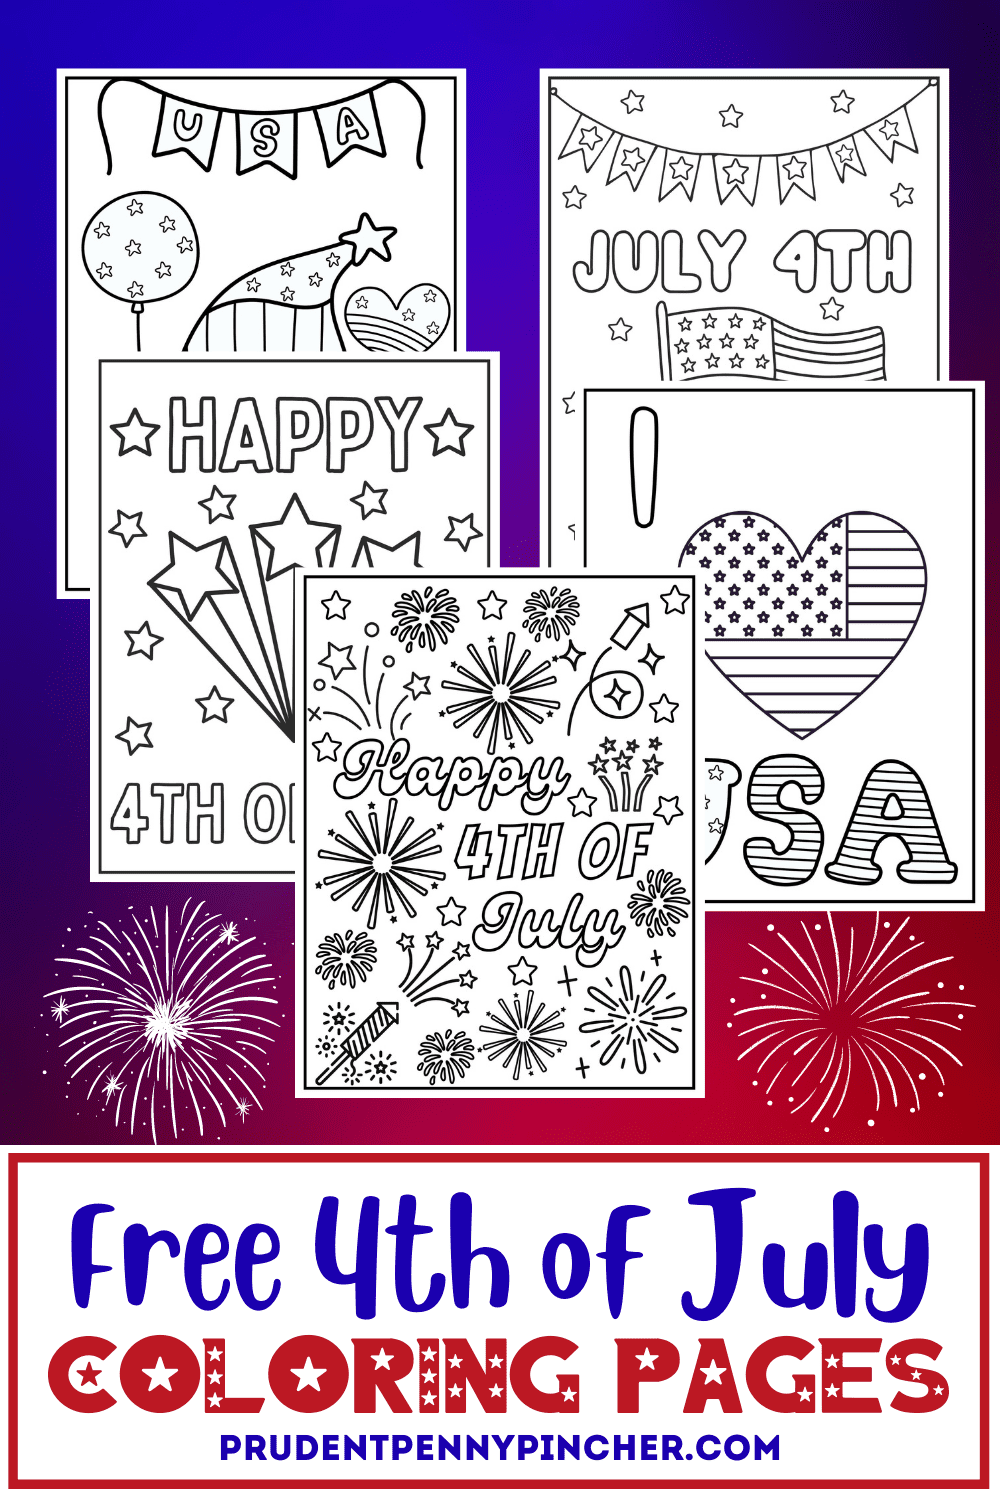 15 Free 4th of July Coloring Pages